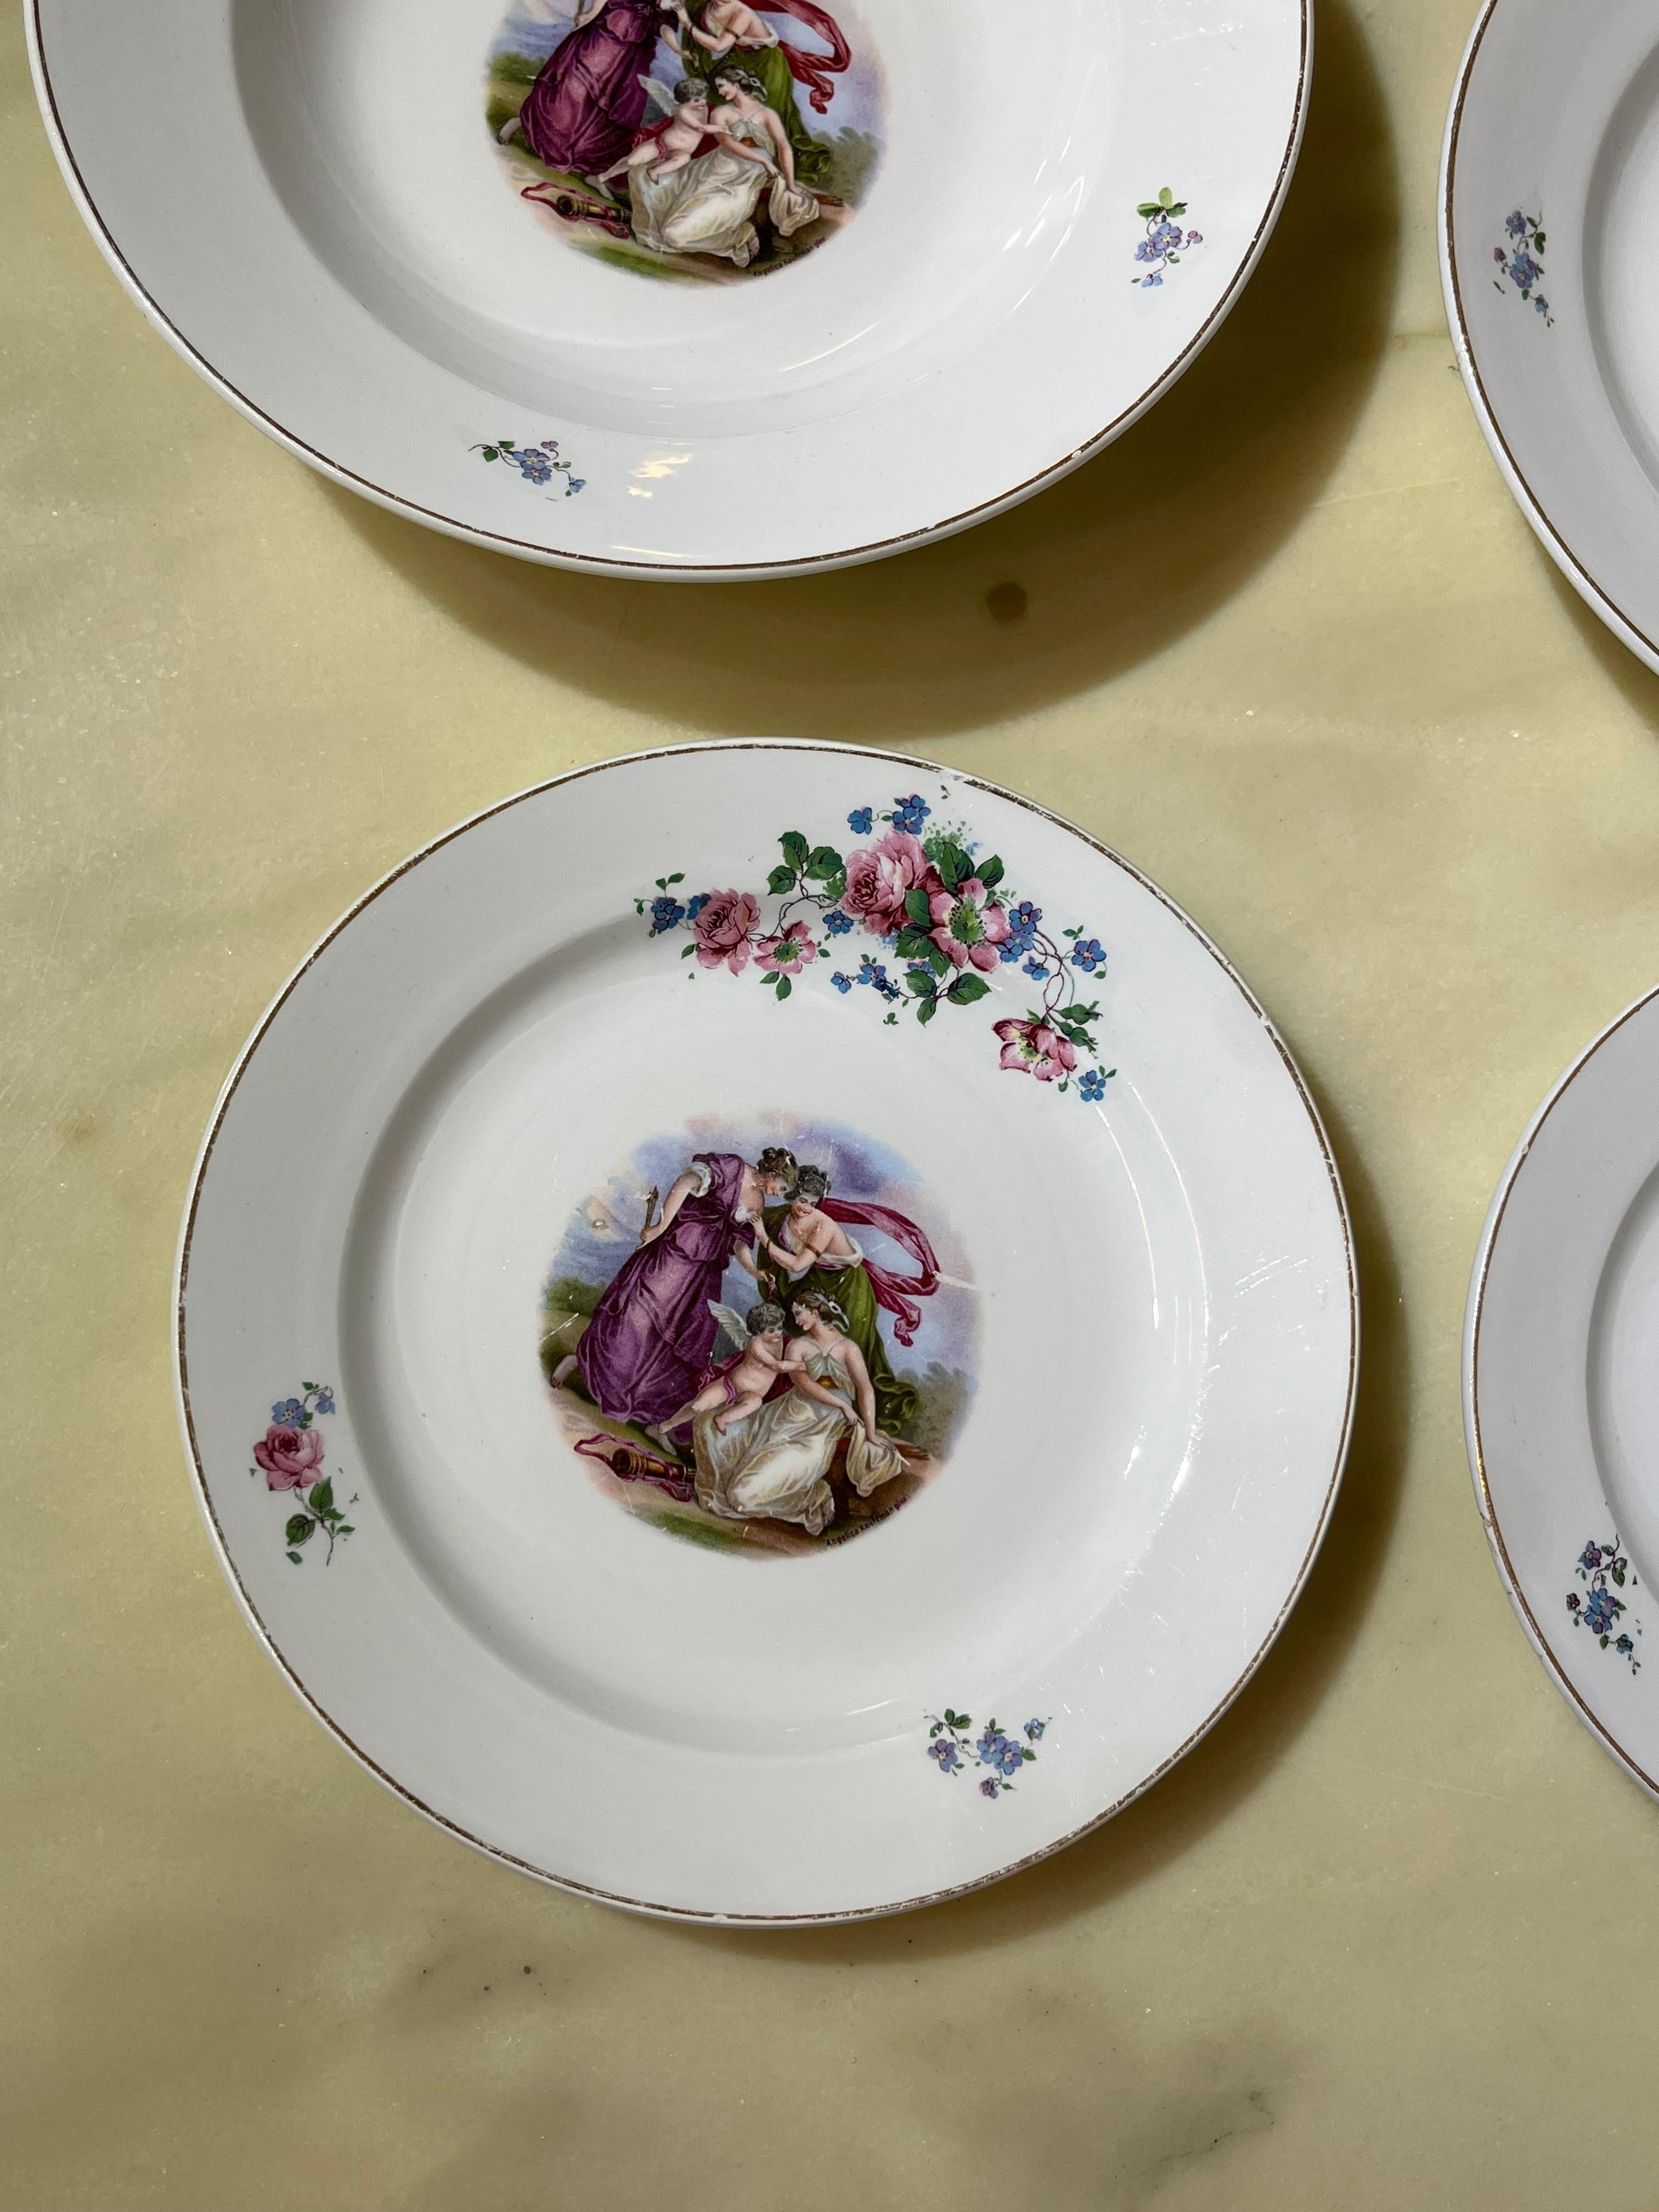 Four Plates, Verbanum Stone Laveno, painter Angelica Kauffman, Italy, 1924
One plate is flat, one deep, one for fruit and one for dessert.
The trademark explicitly refers to the Società Ceramica Italiana of Laveno.
At the center of the plates are